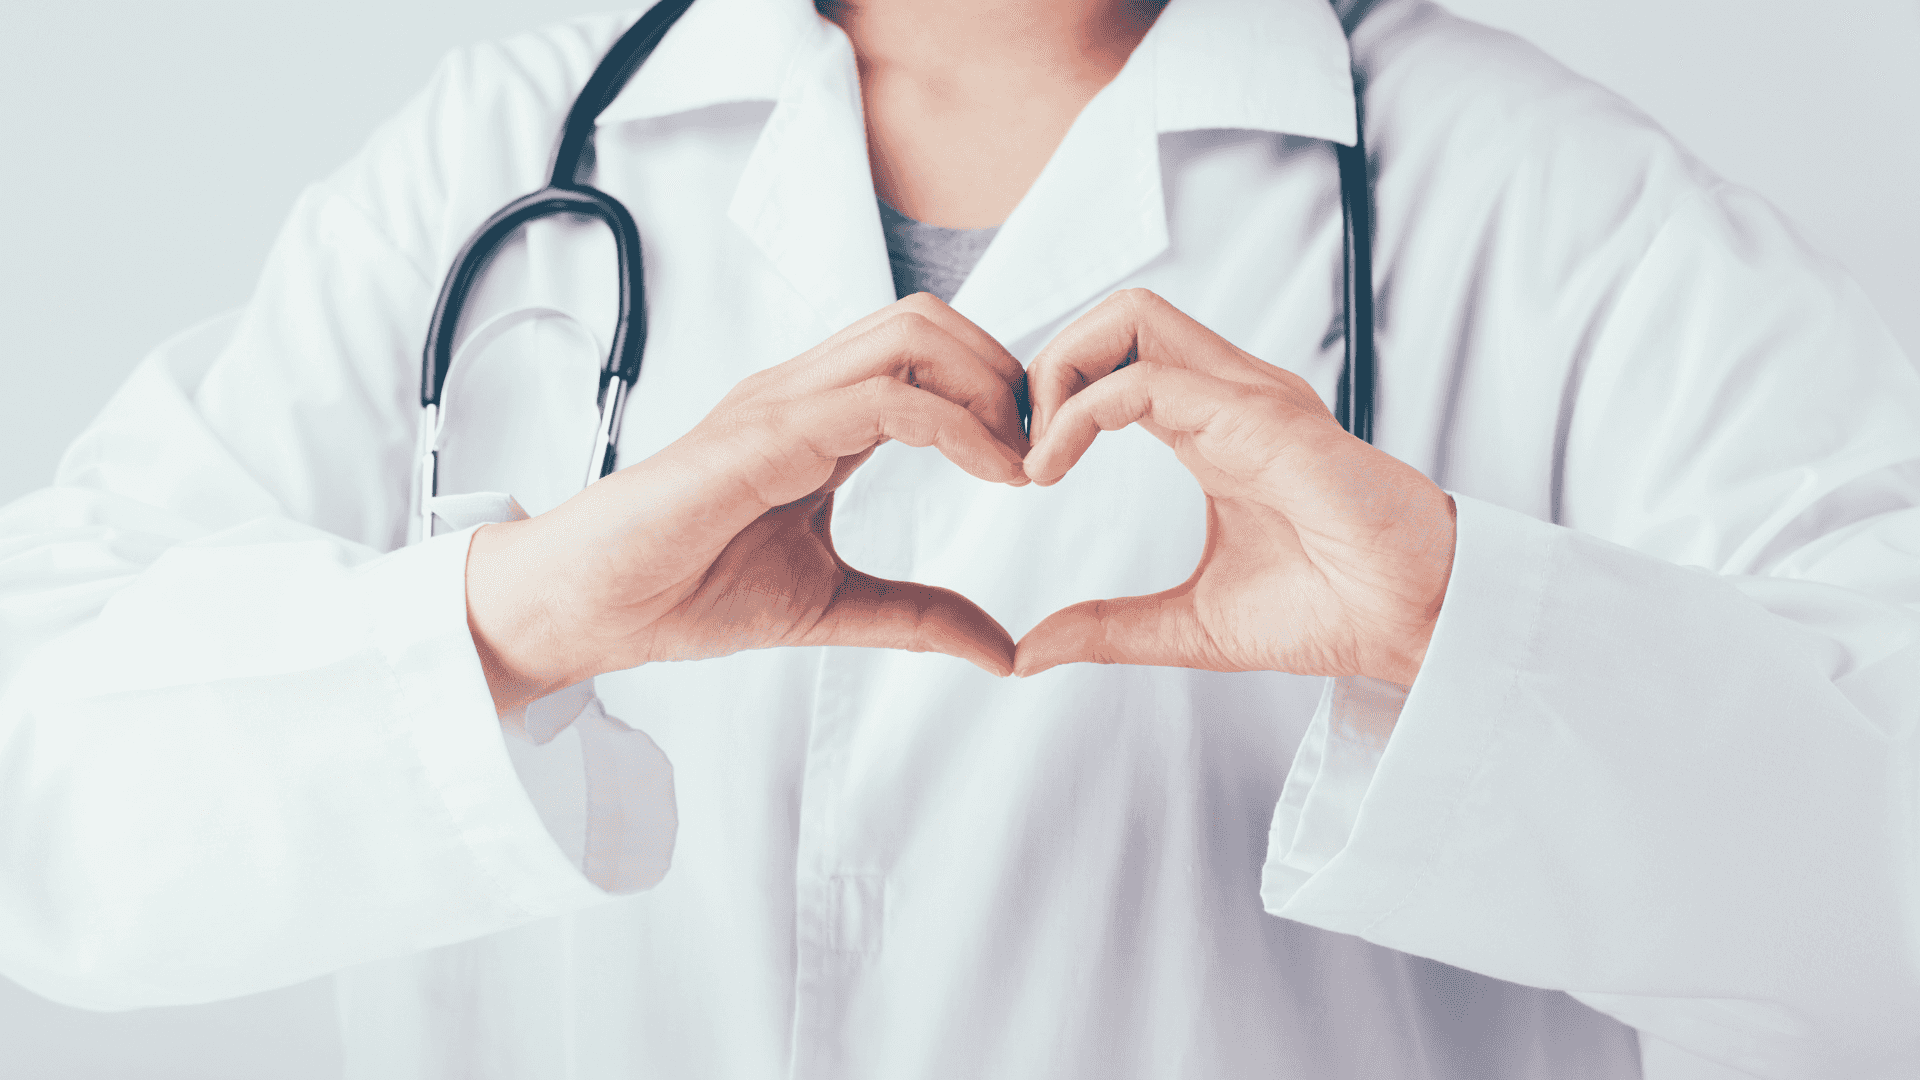 Physician Pictures | Download Free Images on Unsplash